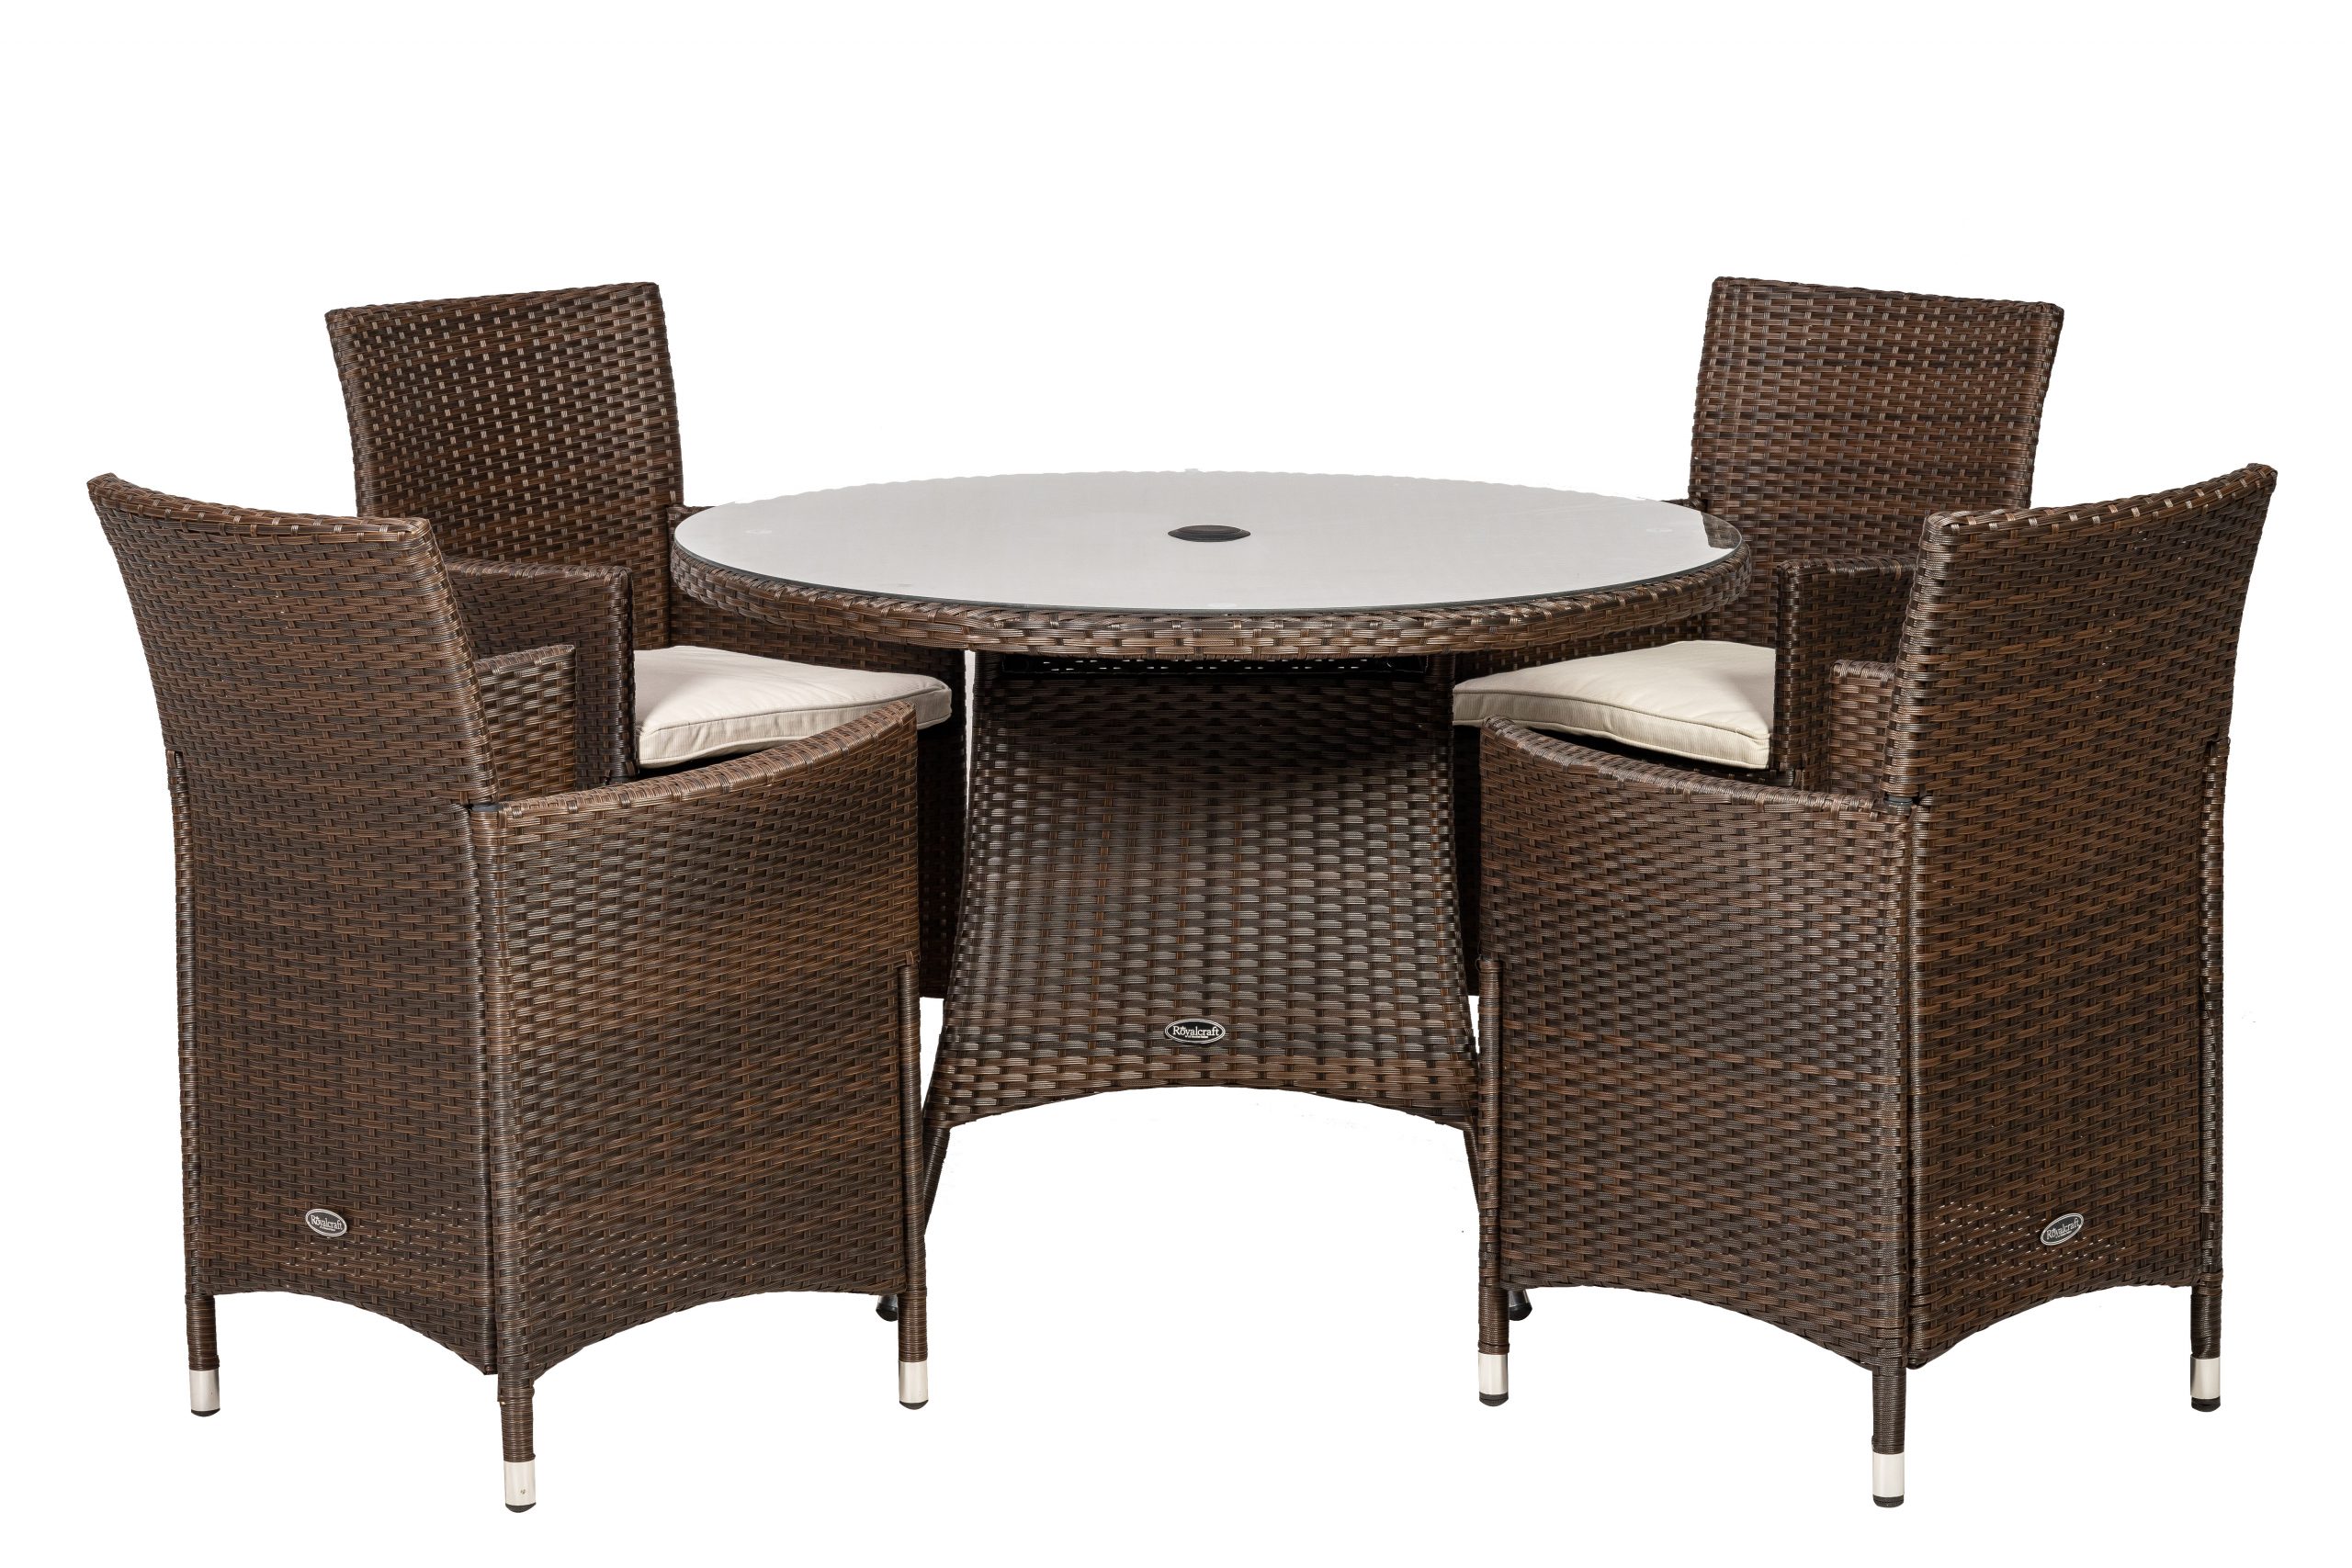 4 seater Cannes Mocha Brown round dining set.